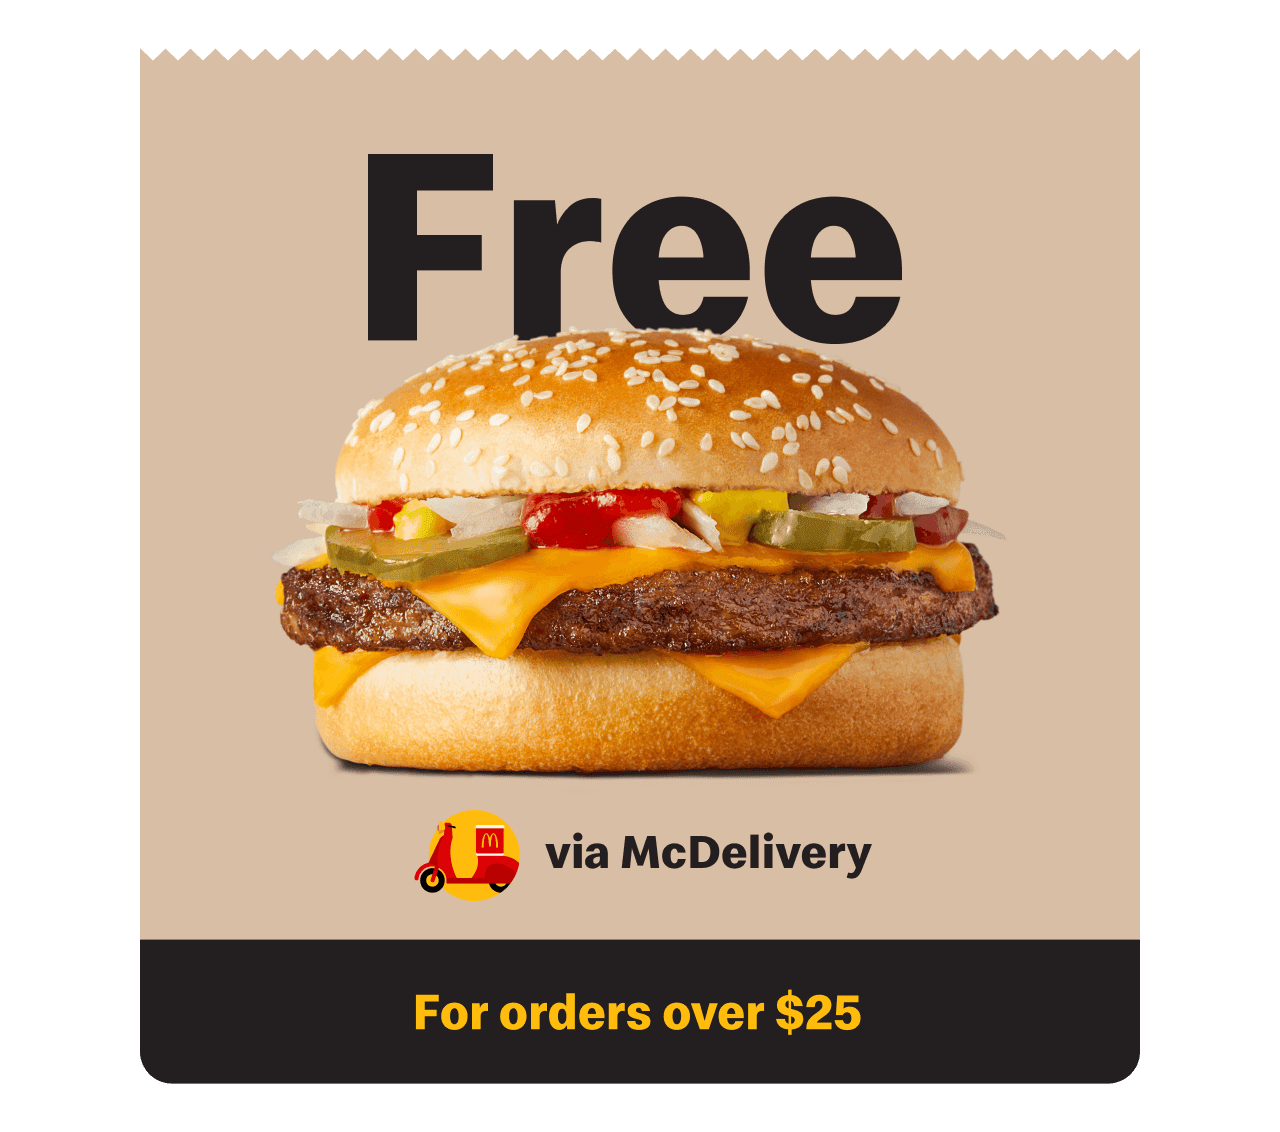 Get a FREE Quarter Pounder with $25+ spend on McDelivery via the MyMacca's app